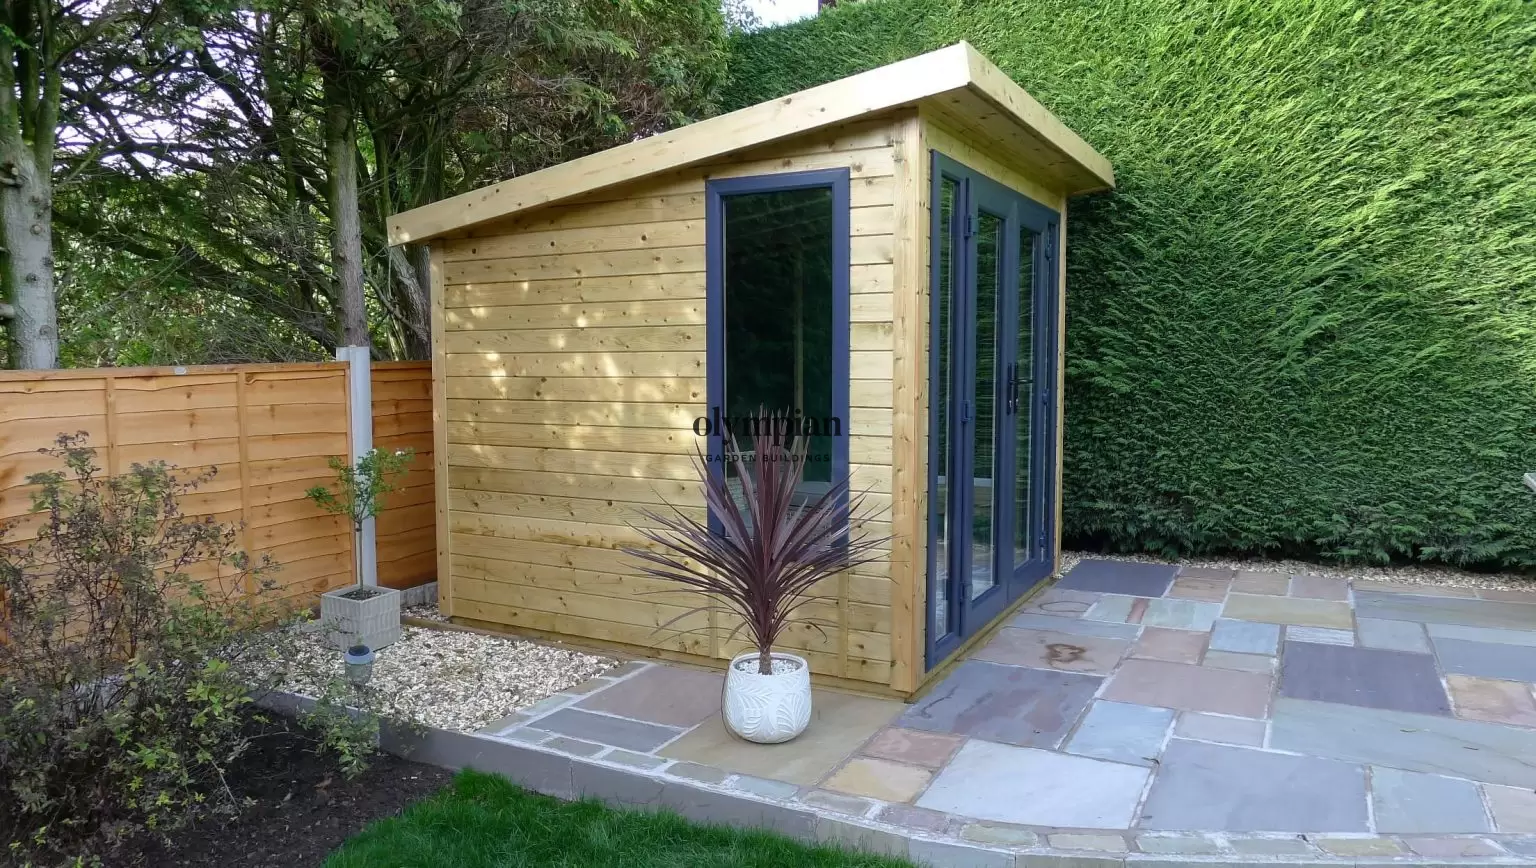 An 8ft x 8ft garden building with single-sloping roof and UPVC doors, in a landscaped garden setting